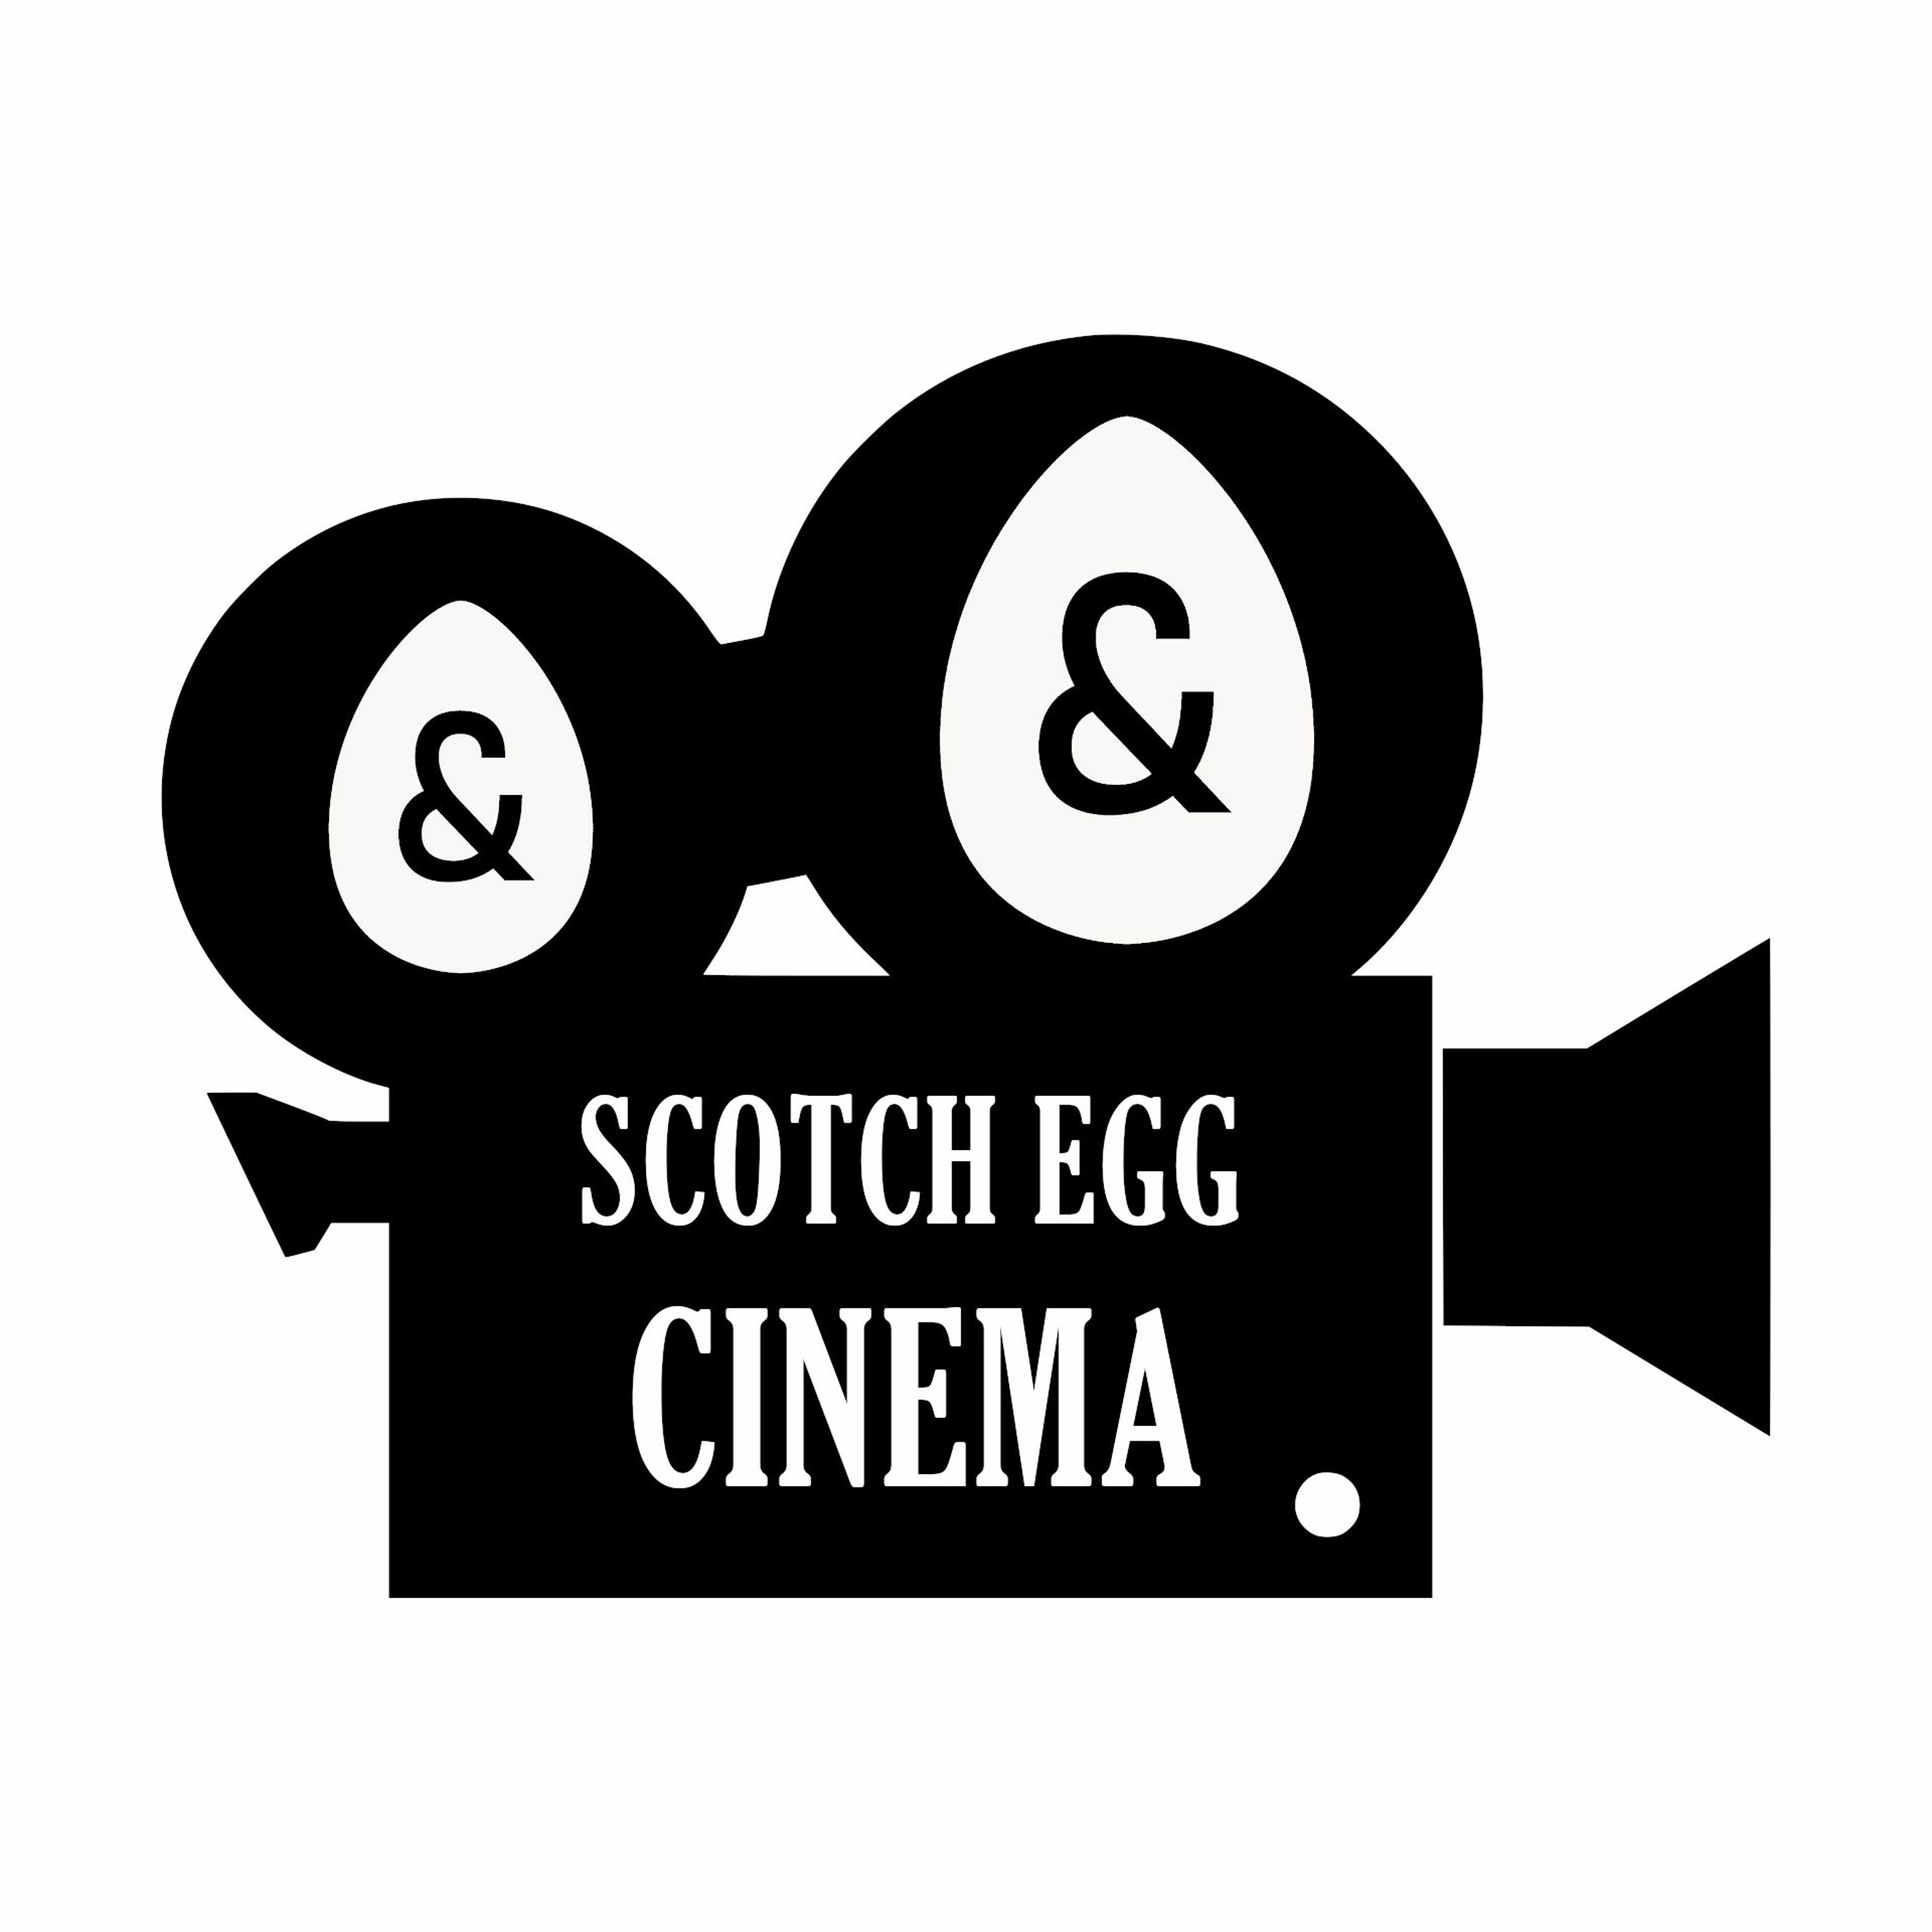 Scotch Egg Cinema - Betty Boop for President / Night of the Living Dead